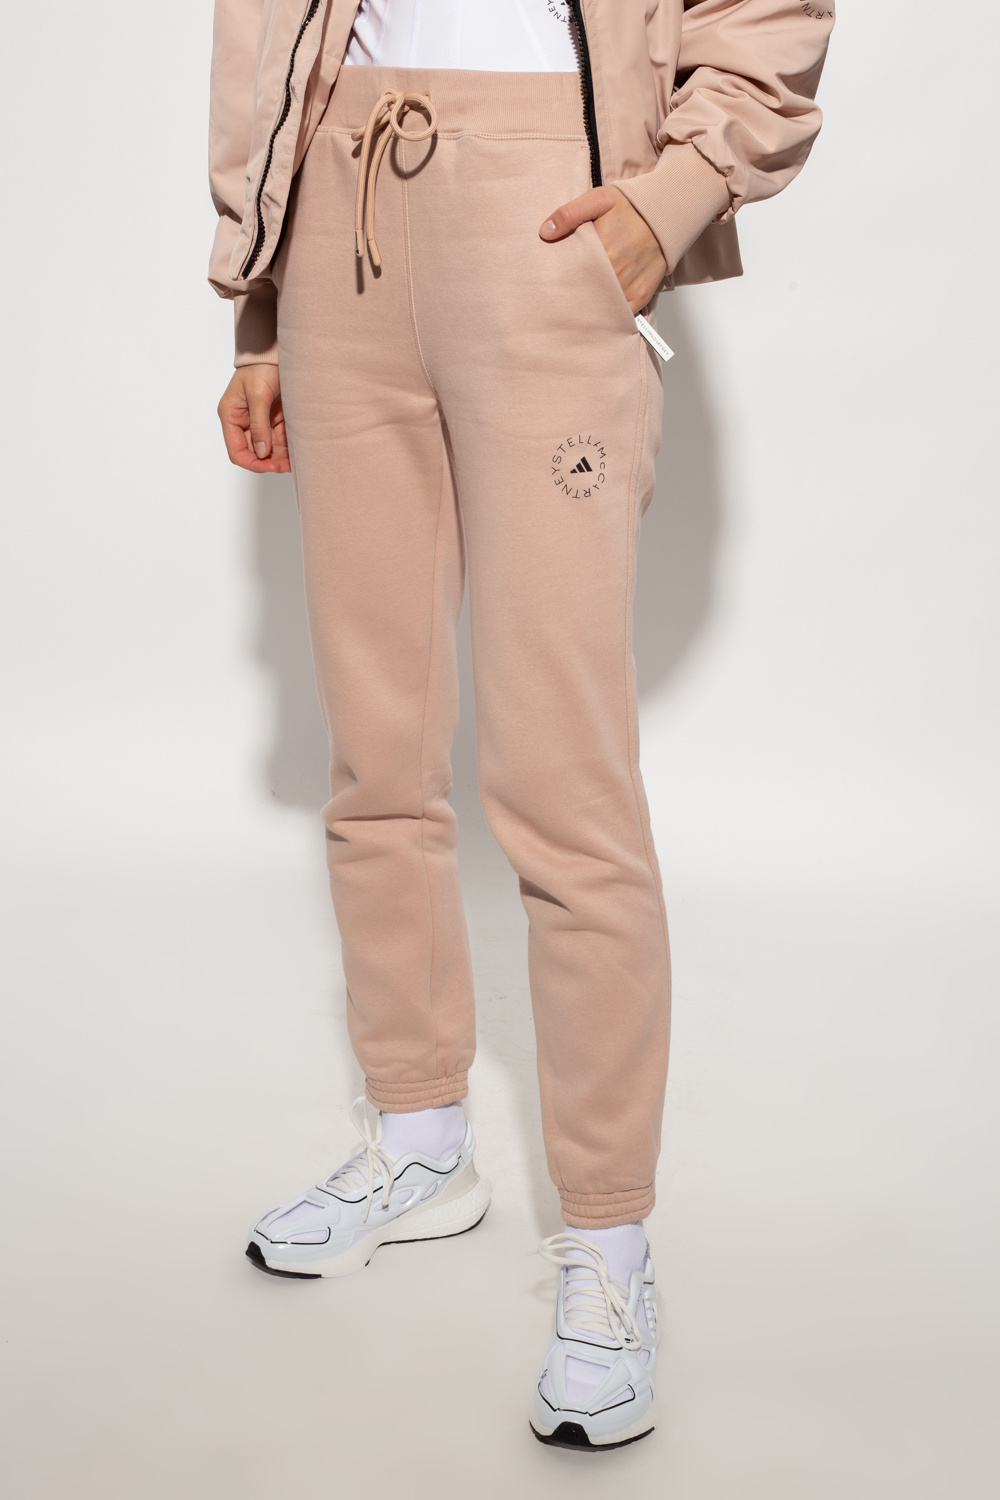 ADIDAS by Stella McCartney ‘Agent of Kindness ‘ collection sweatpants